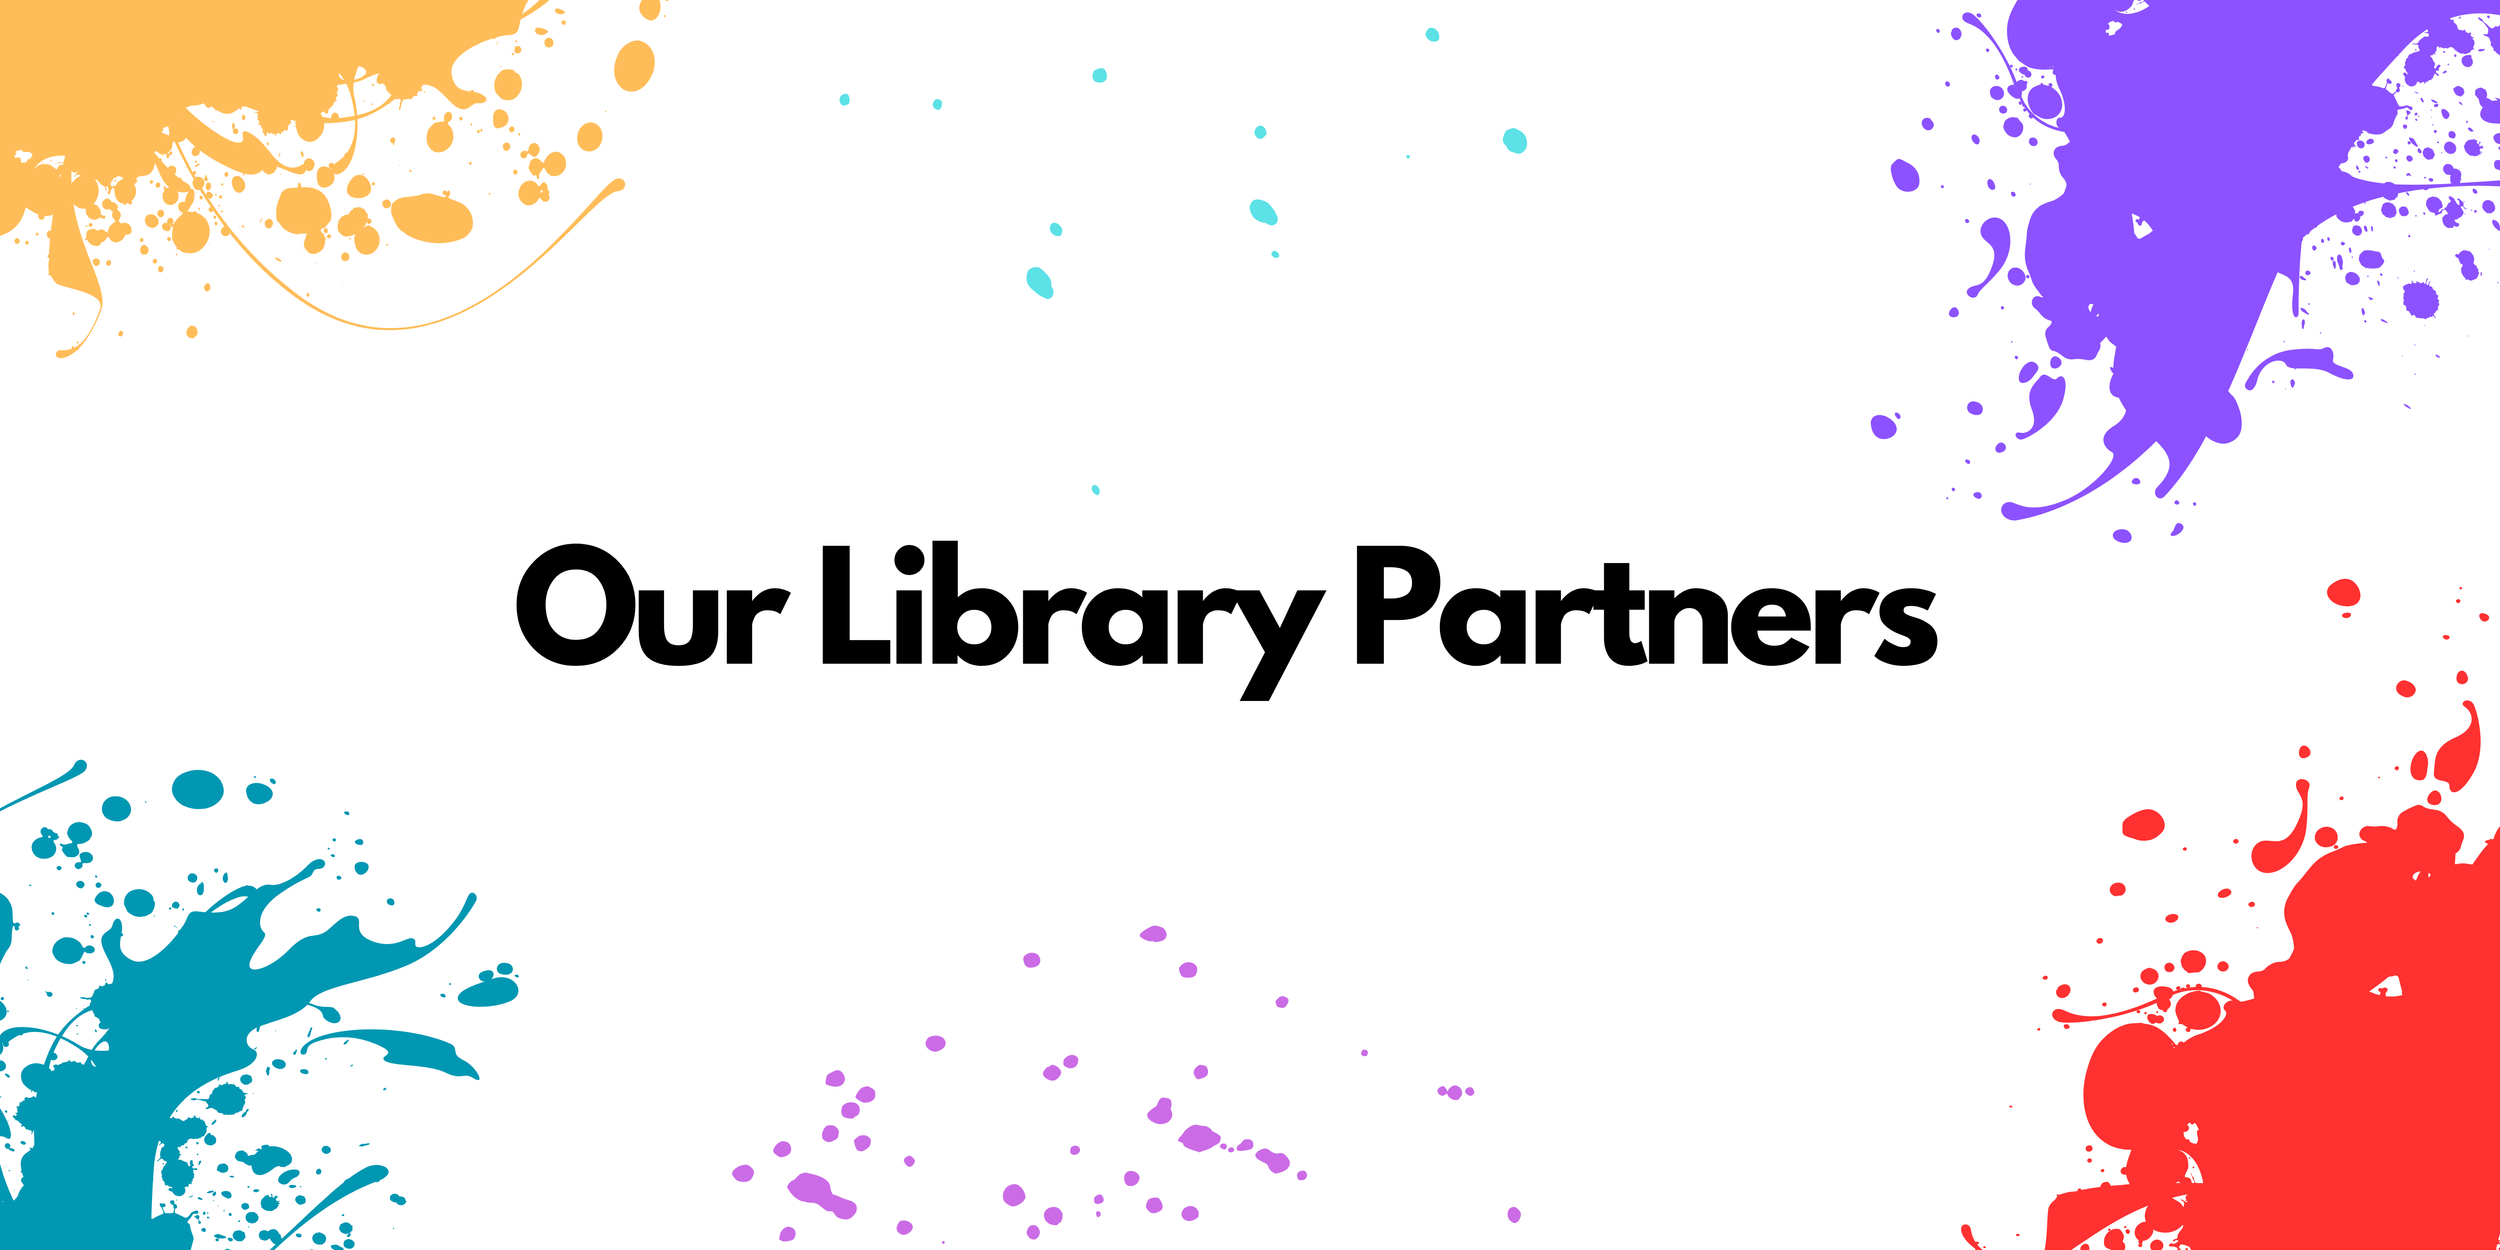 Our Library Partners